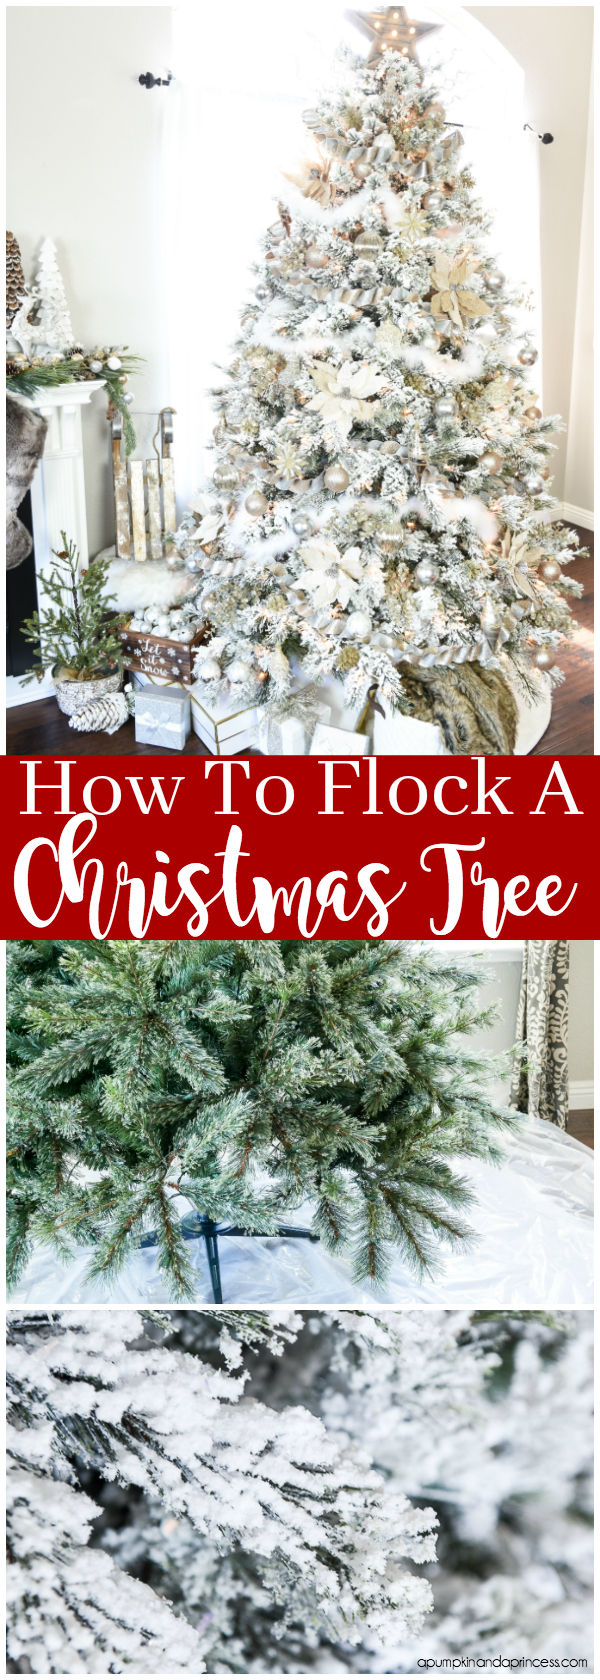 How-To-Flock-a-Christmas-Tree